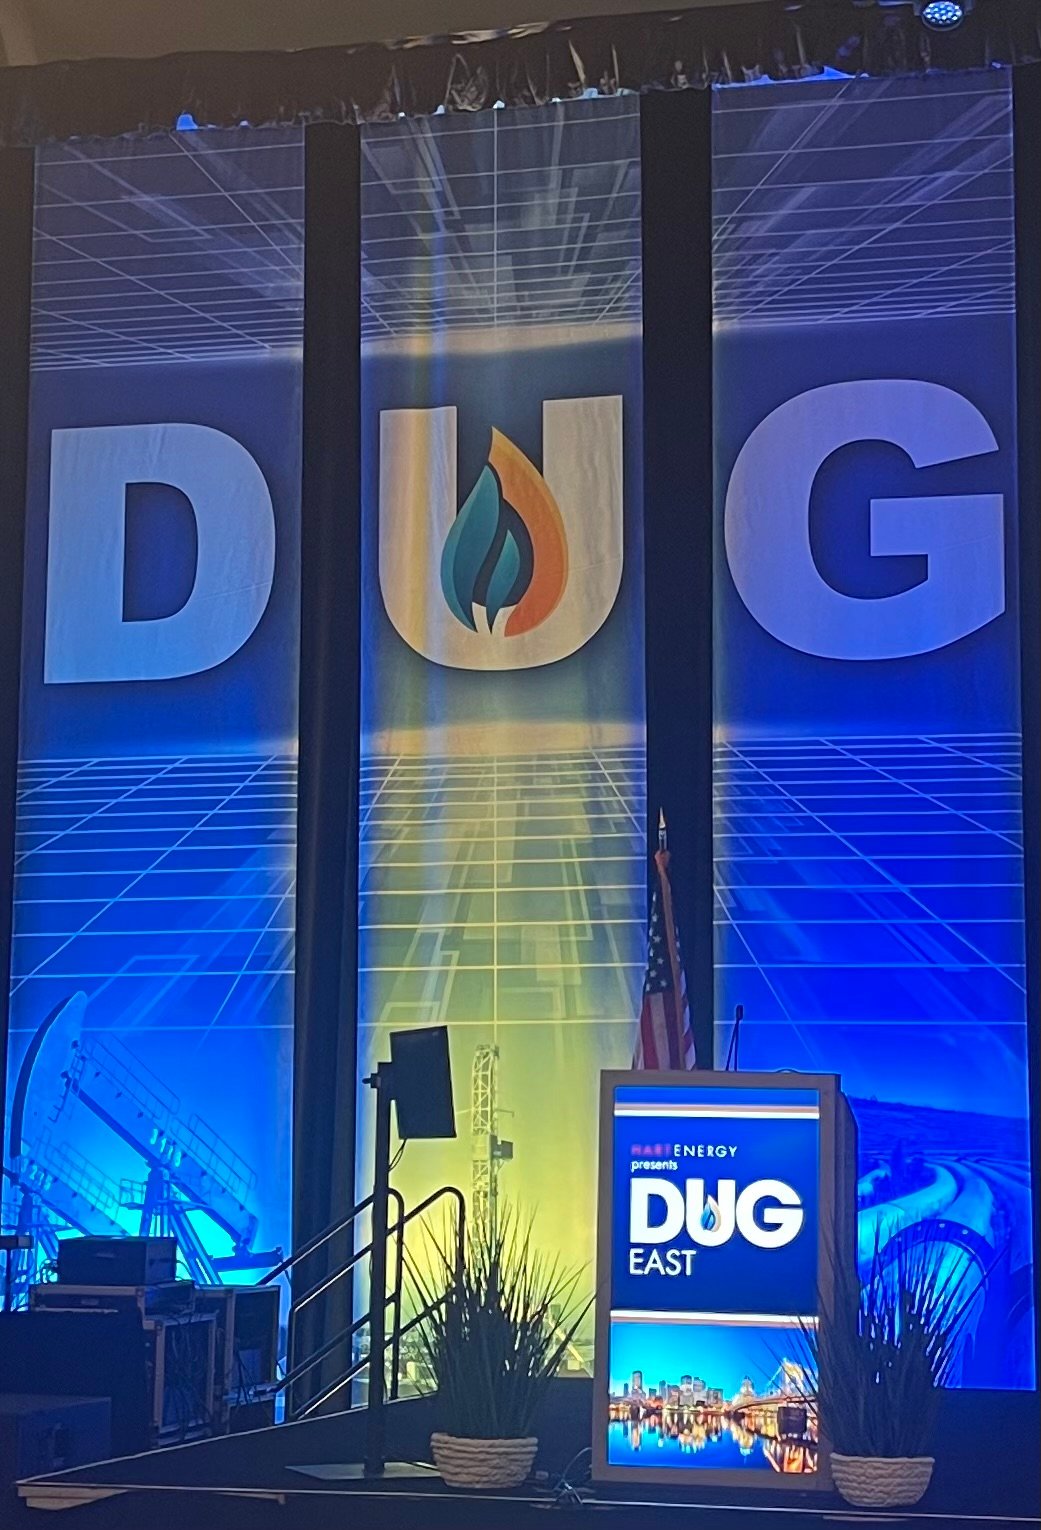 Addressing Challenges at the 2022 DUG Conference